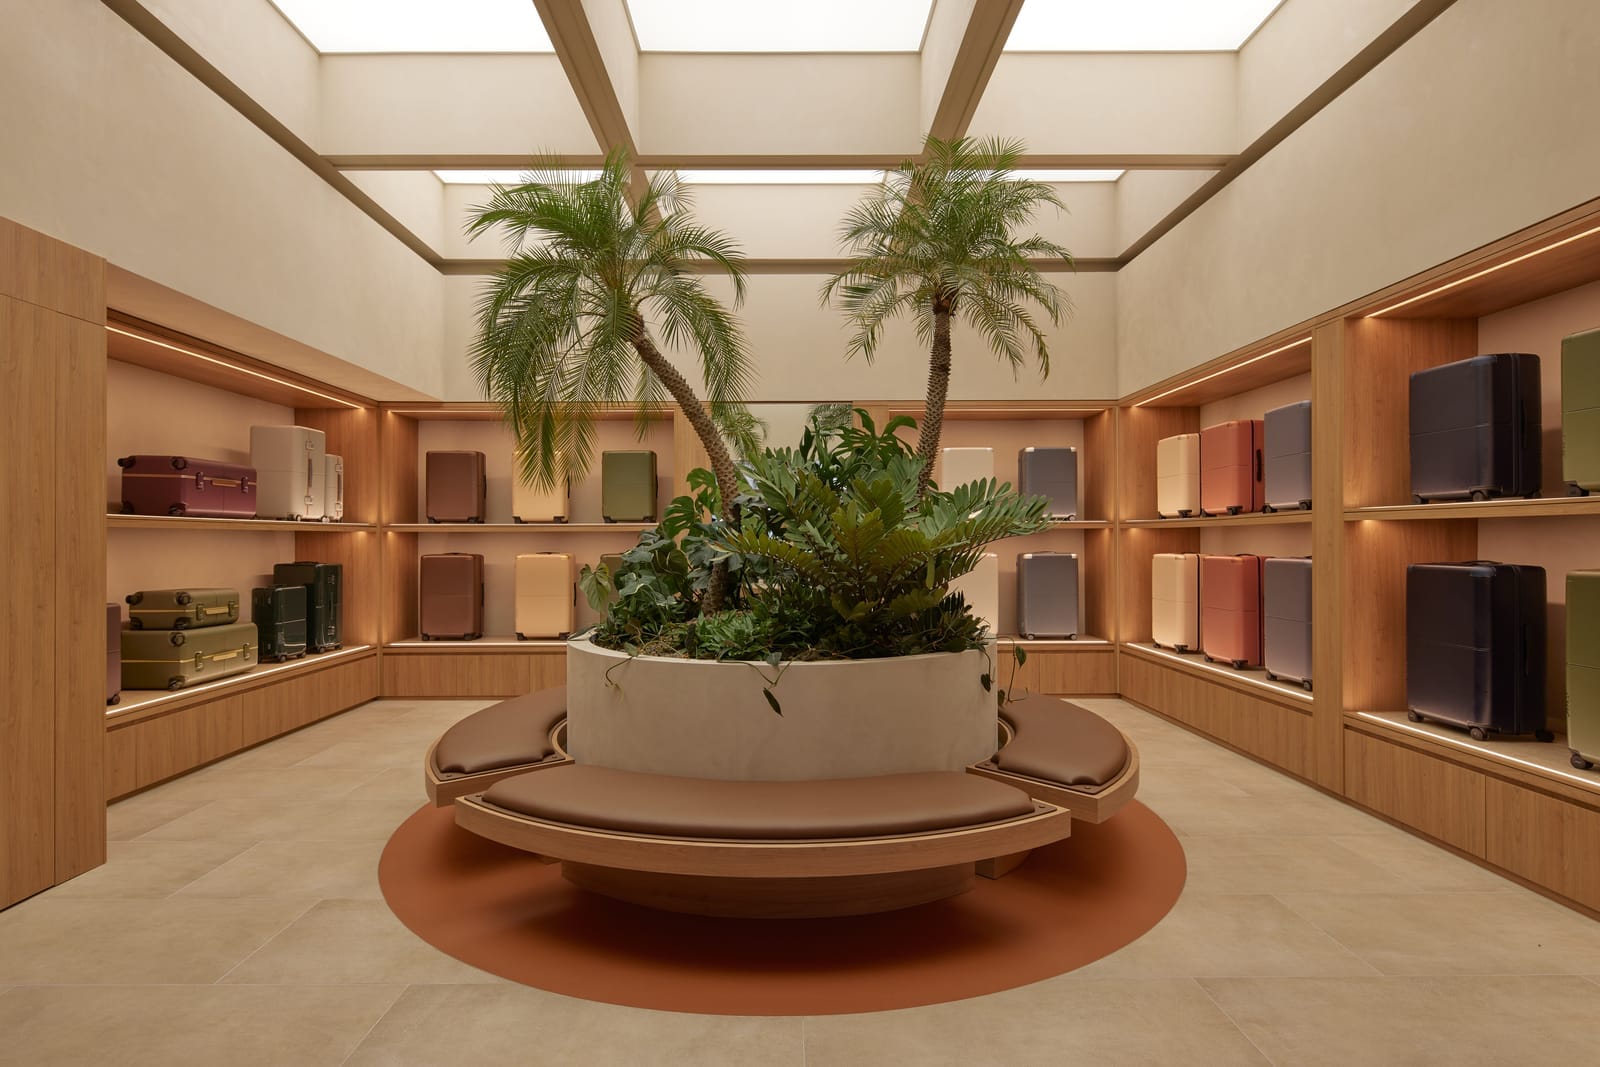 July Store by Acre. Photography by Cieran Murphy. Large circular planter in centre of grey tiled floor. Leather bench seating around planter. Timber shelving on walls. 